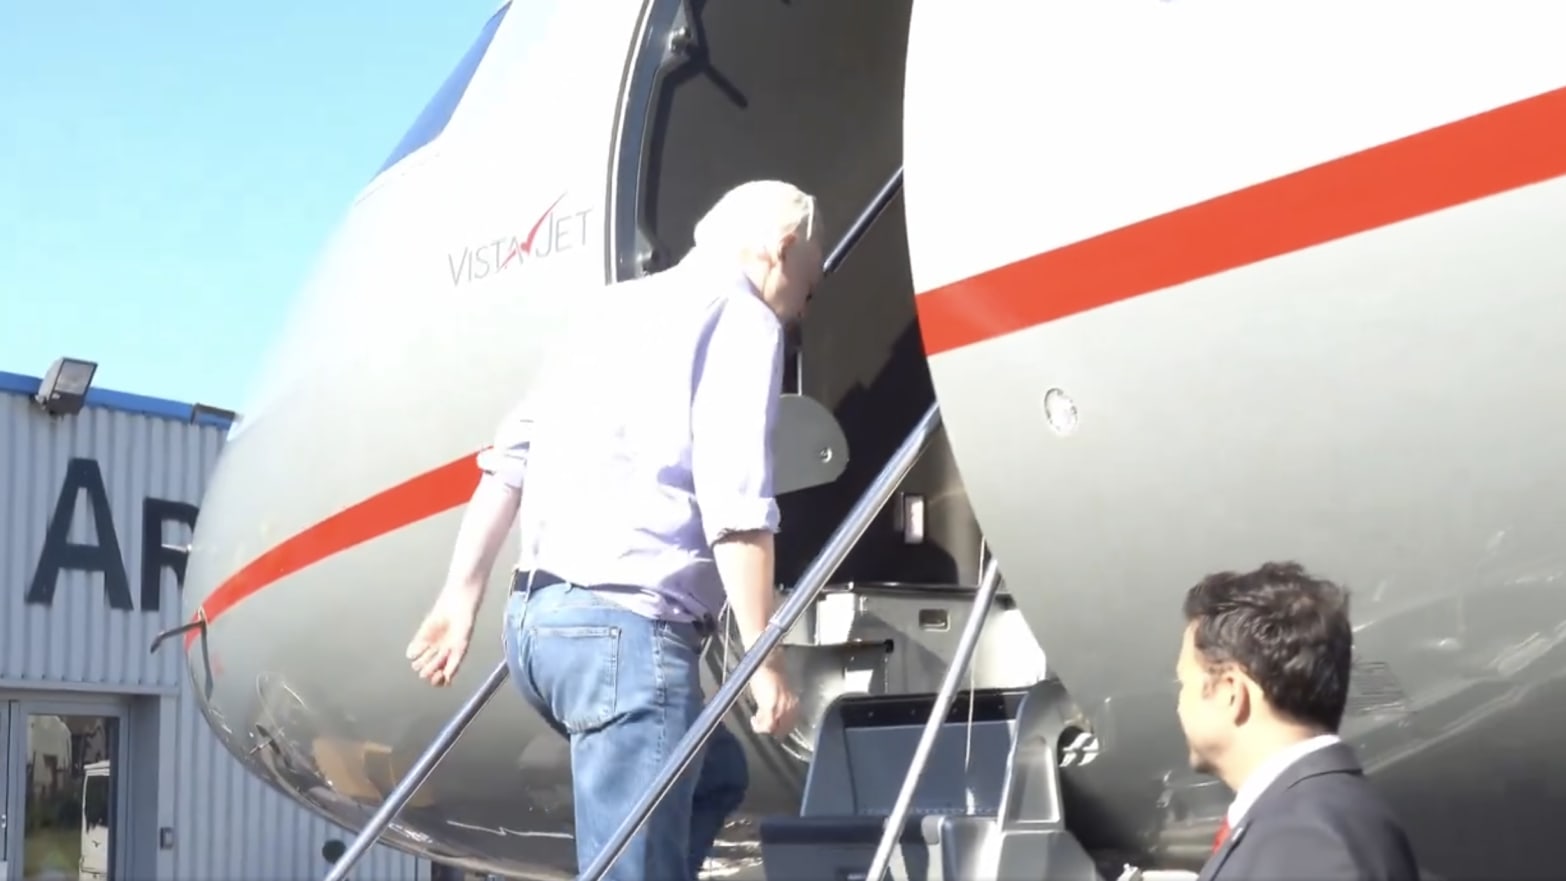 Julian Assange boarding a plane and departing the U.K. after striking a deal with U.S. prosecutors.